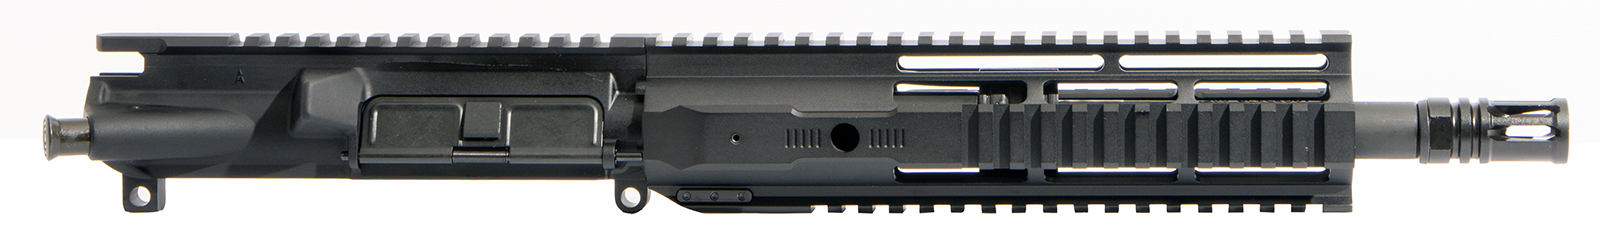 ar15-10-5-300aac-blk-upper-assembly-7-hera-arms-rail